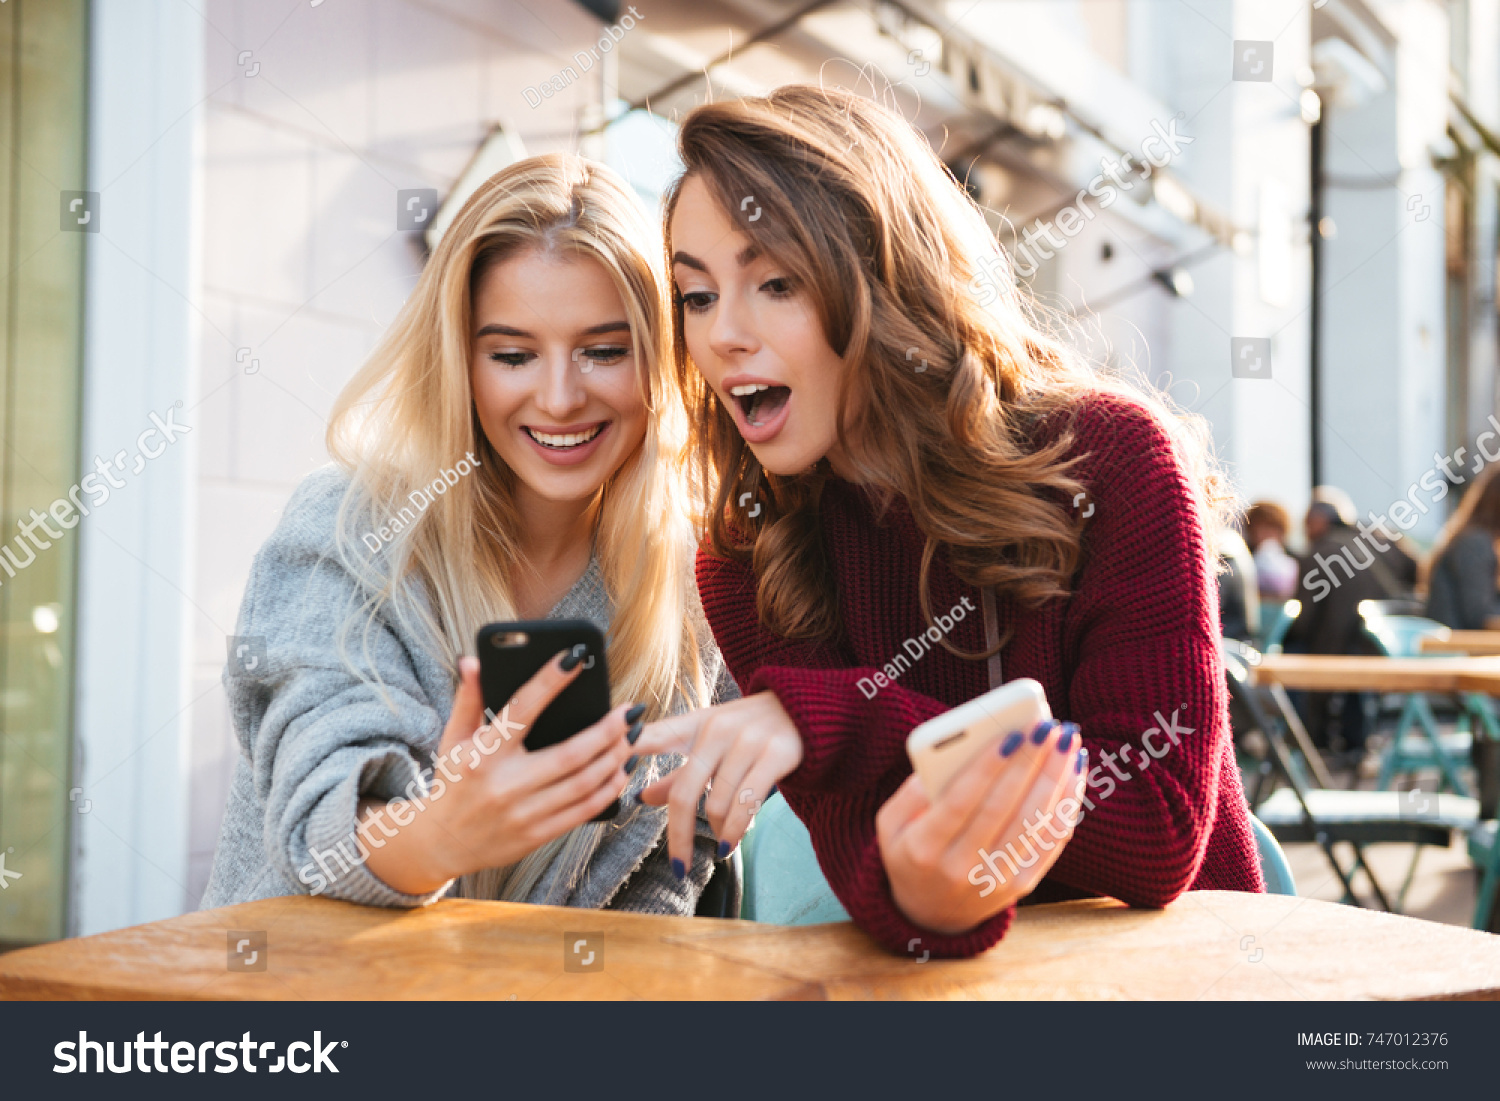 Two excited young girls using mobile phones while sitting at the cafe outdoors and pointing finger #747012376